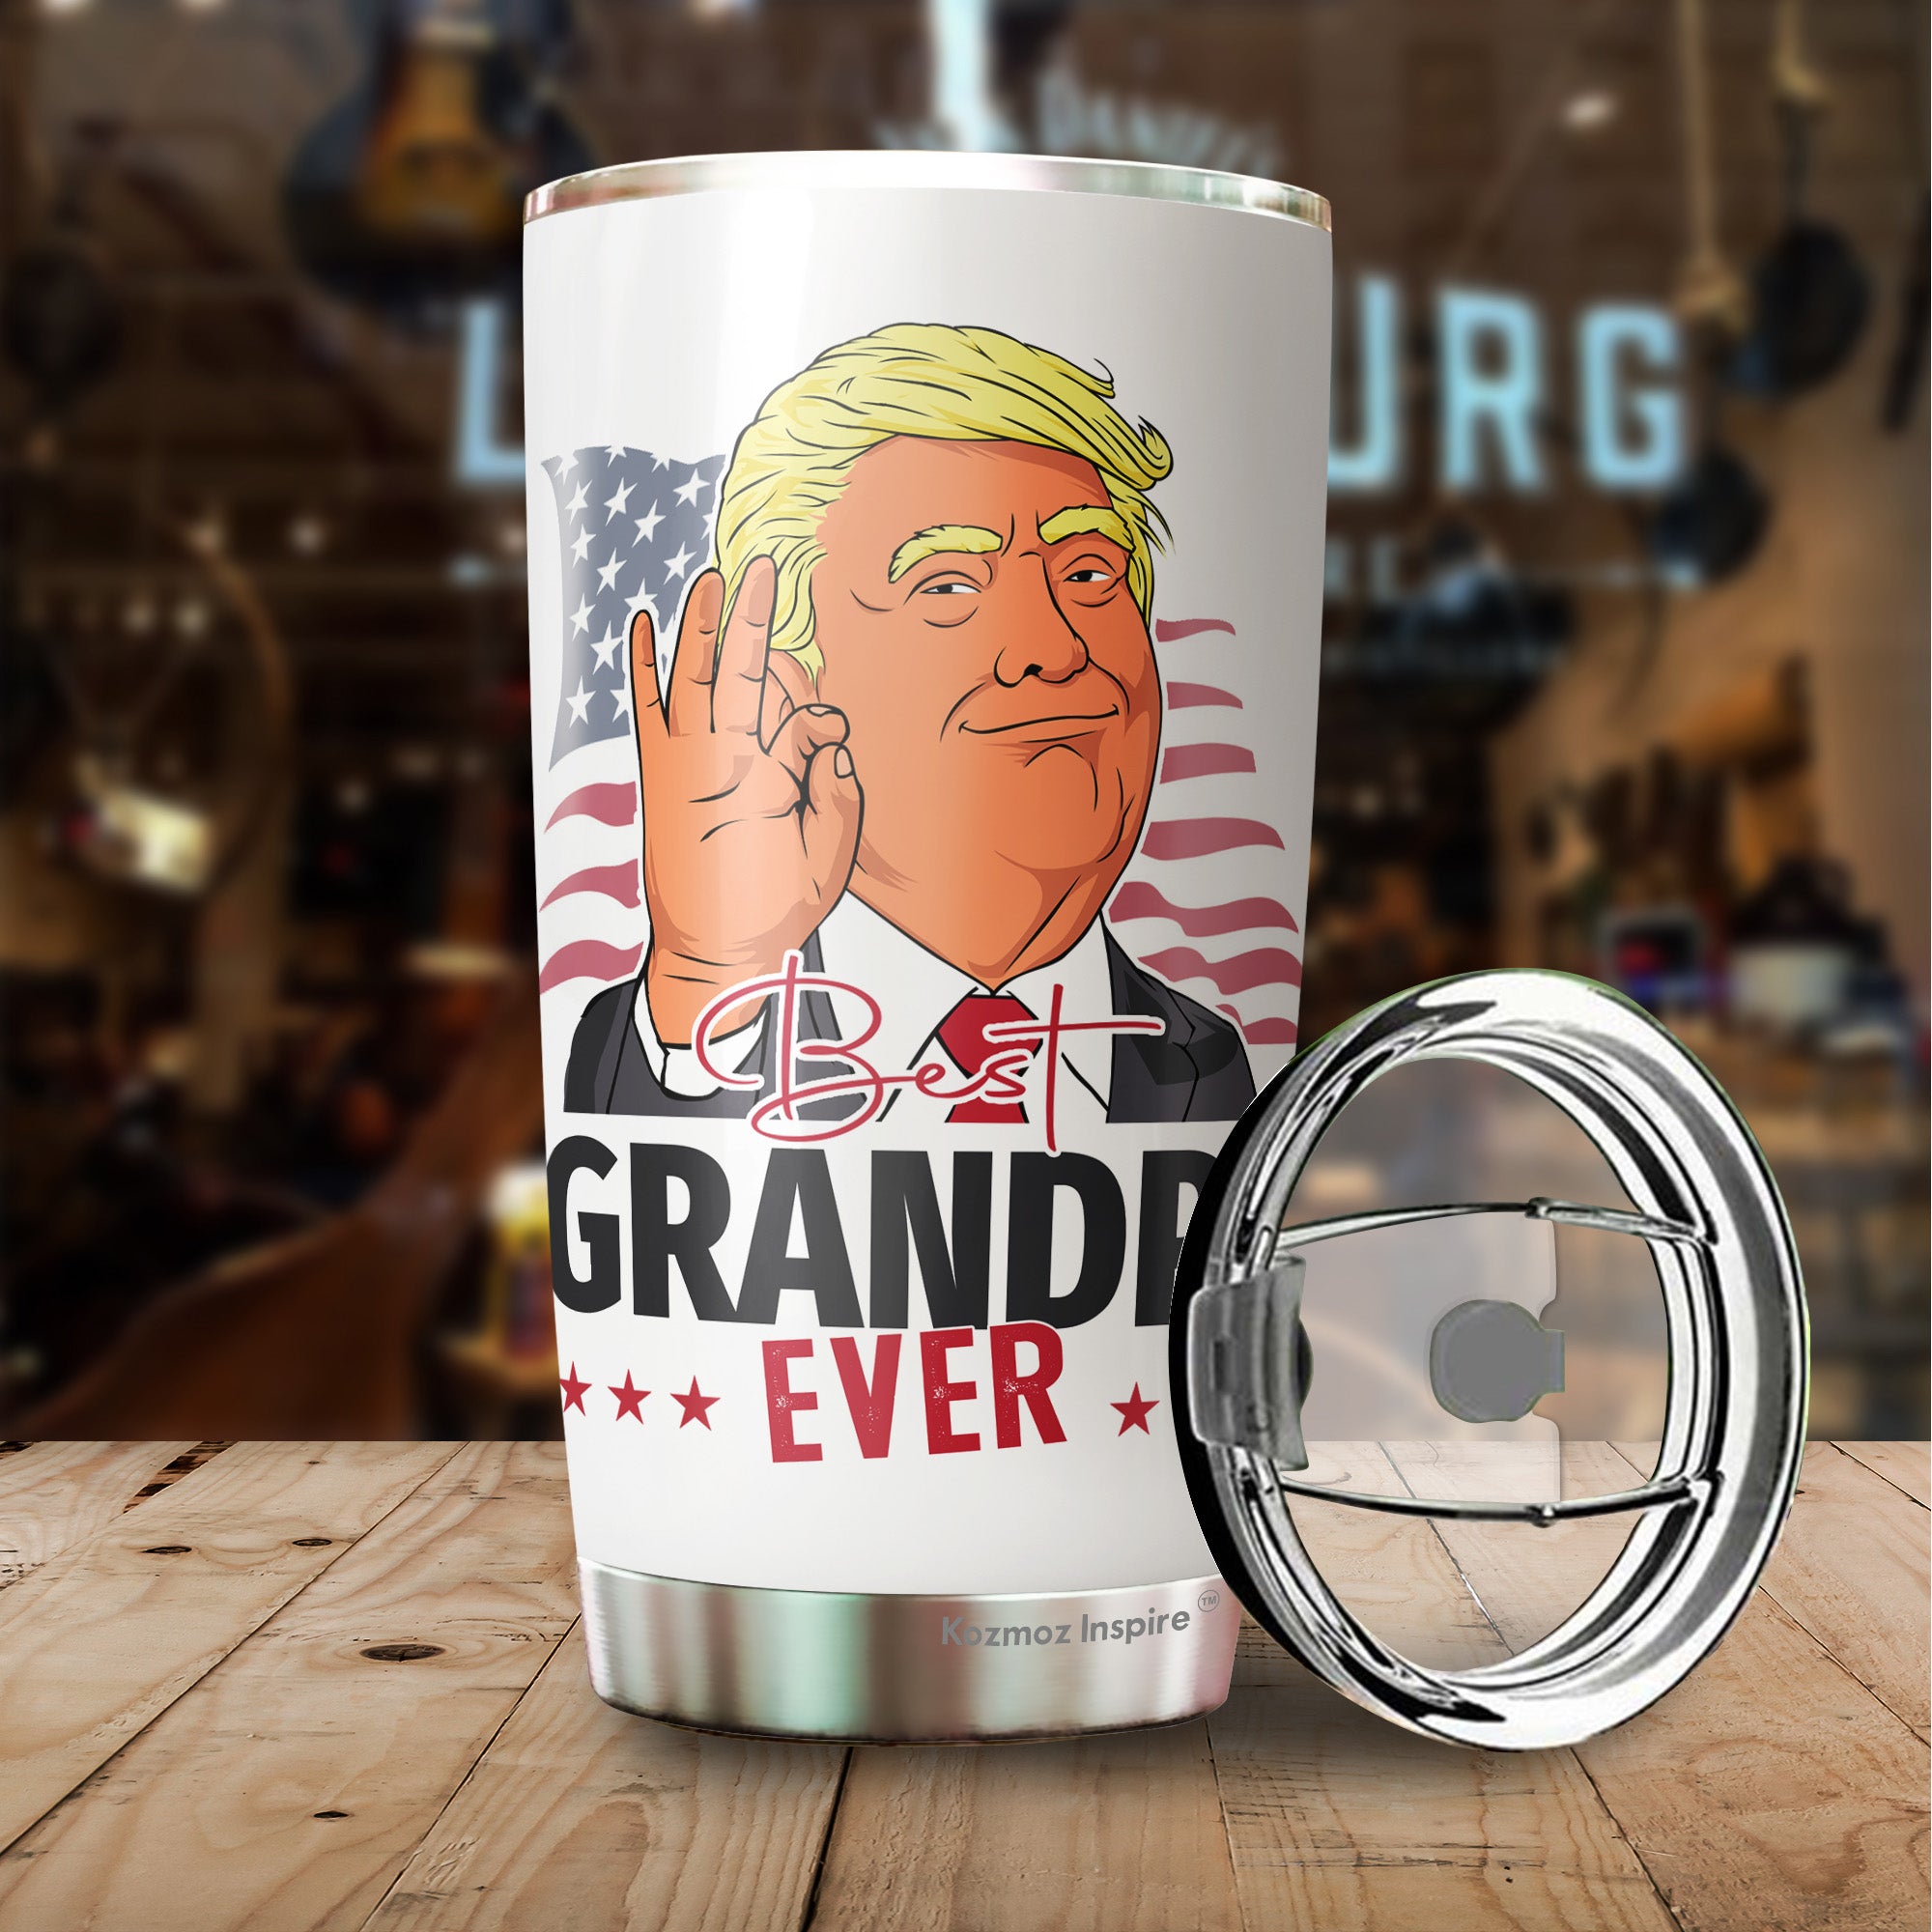 Best Grandpa Ever Travel Coffee Mug Father's Day Gift Tumbler 20